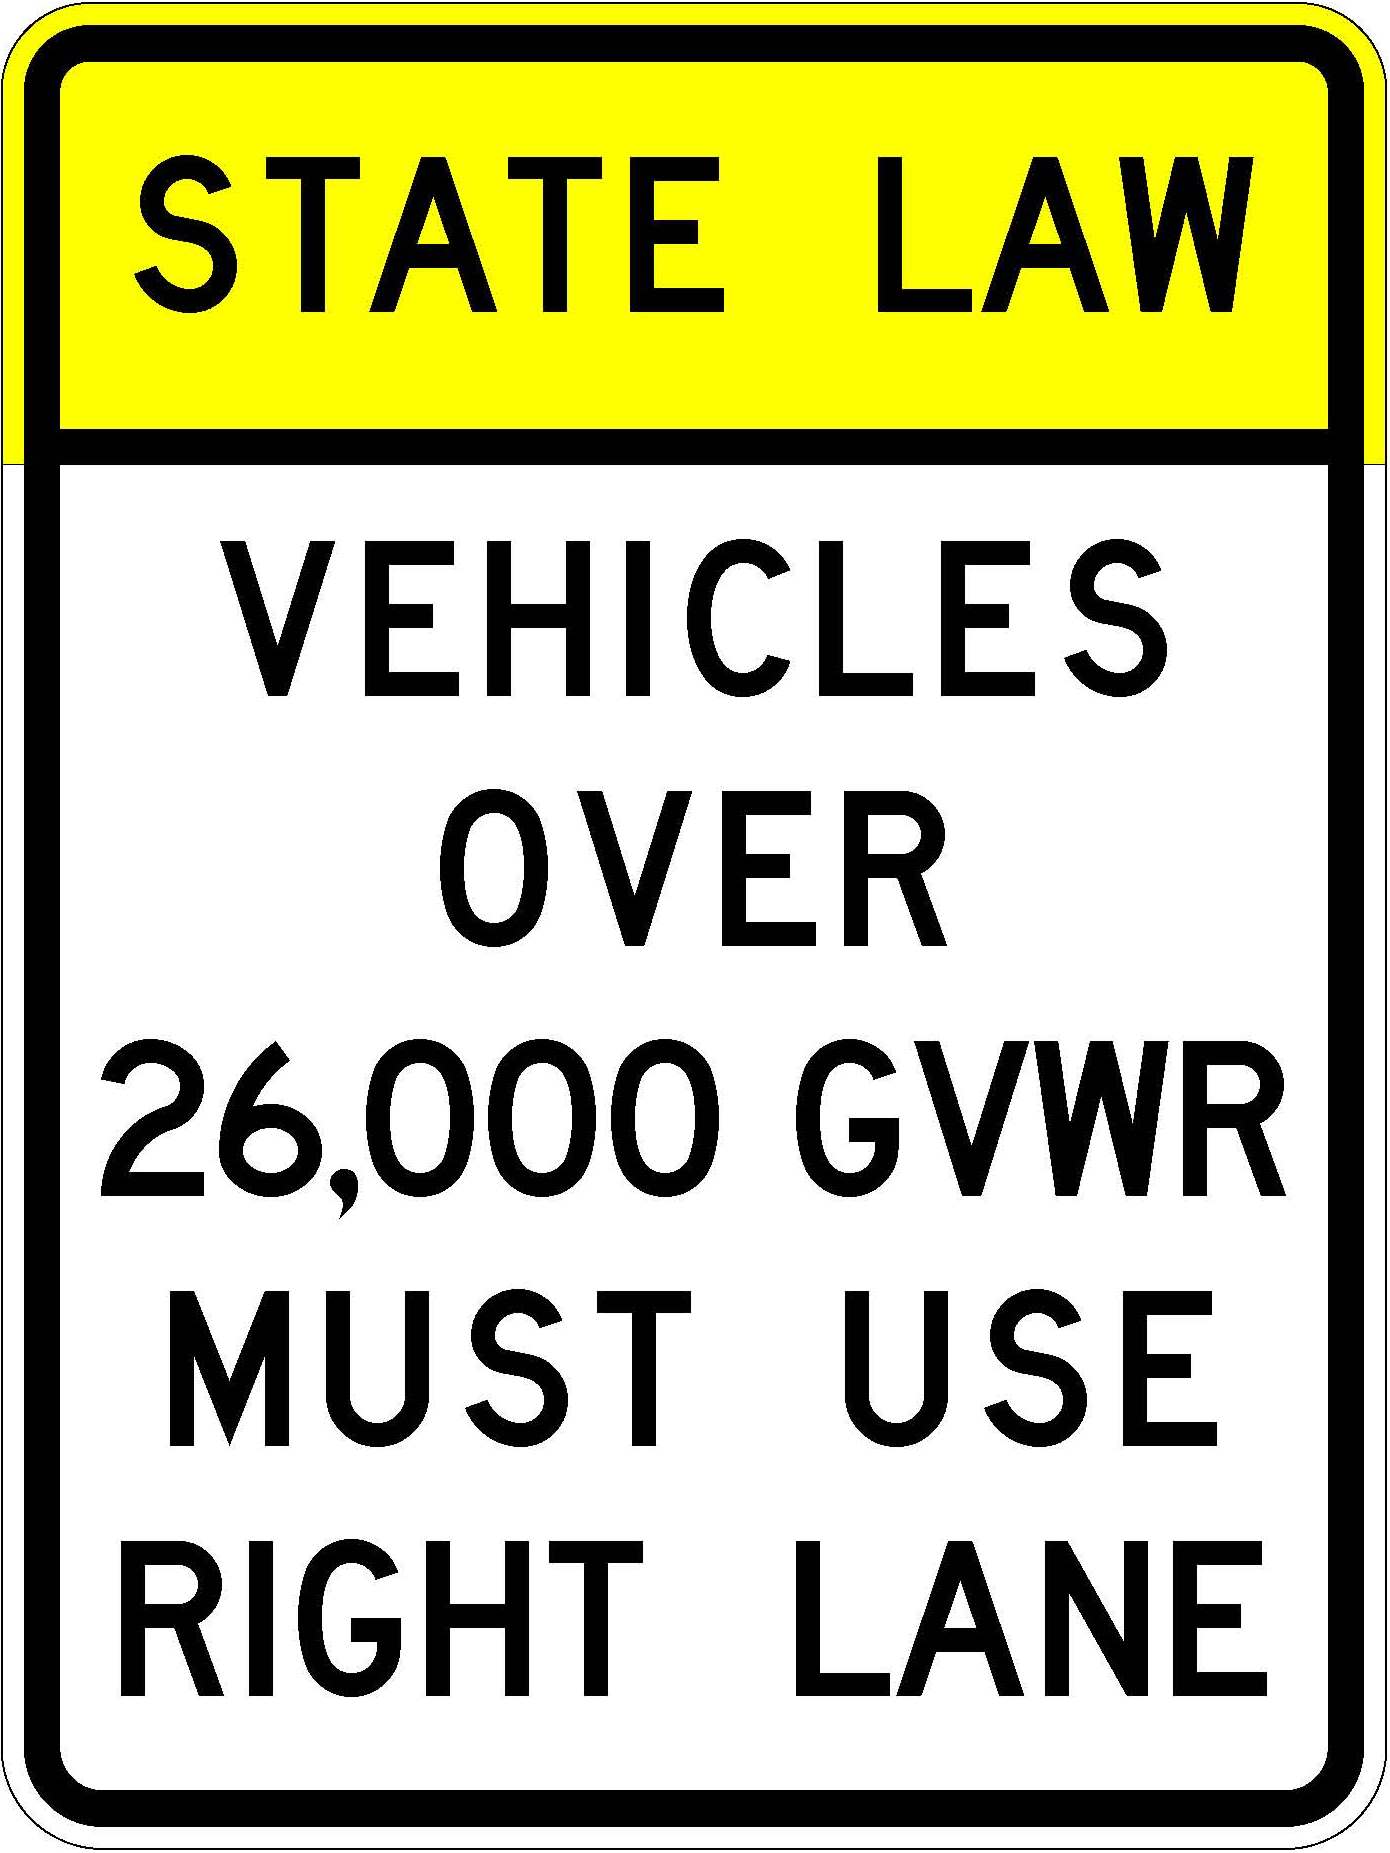 R4-5a State Law Vehicles Over 26,000 GVWR Must Use Right Lane detail image